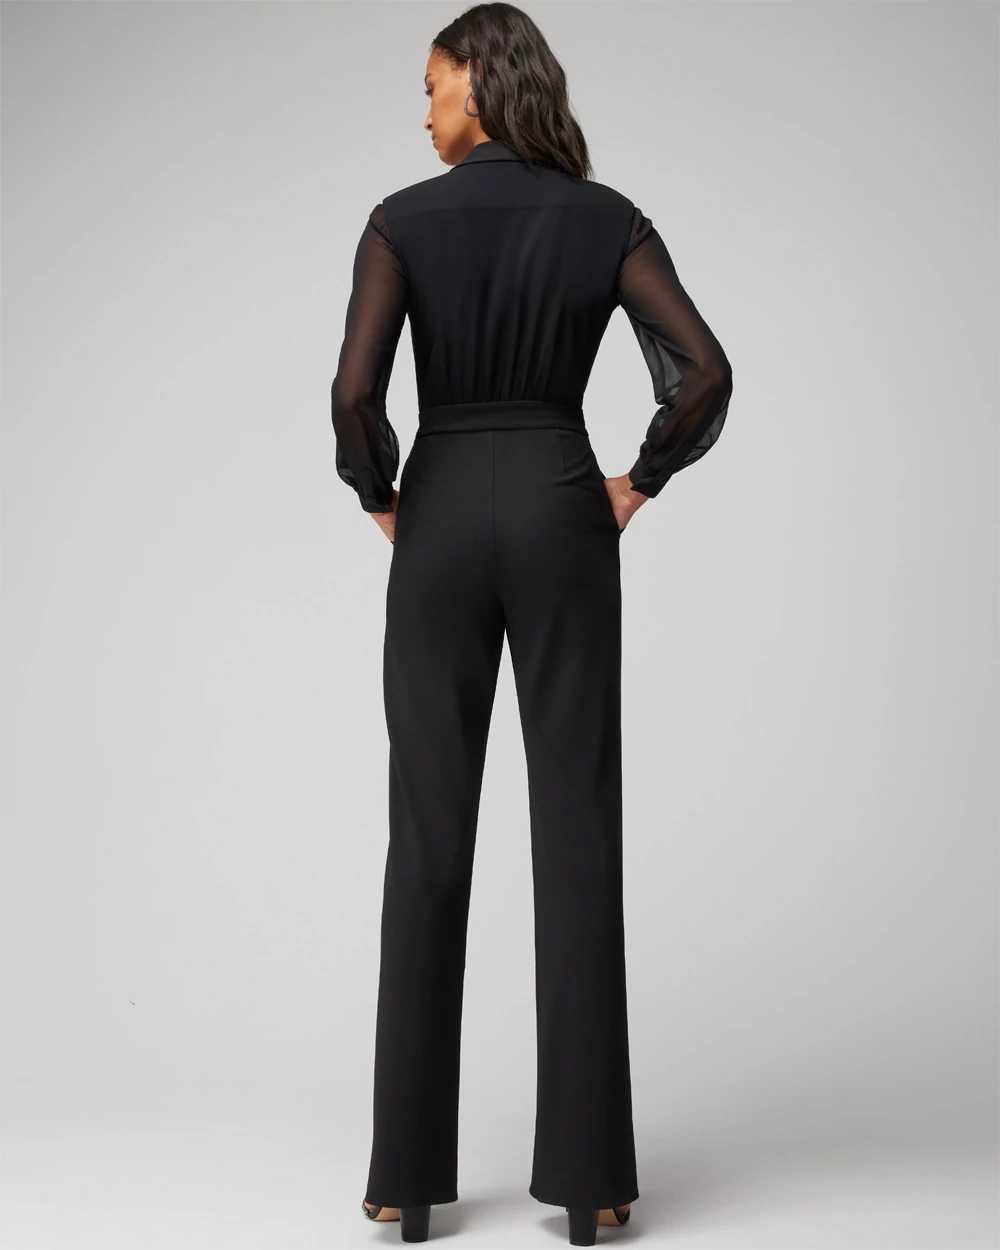 Long Sleeve Sheer Sleeve Jumpsuit click to view larger image.